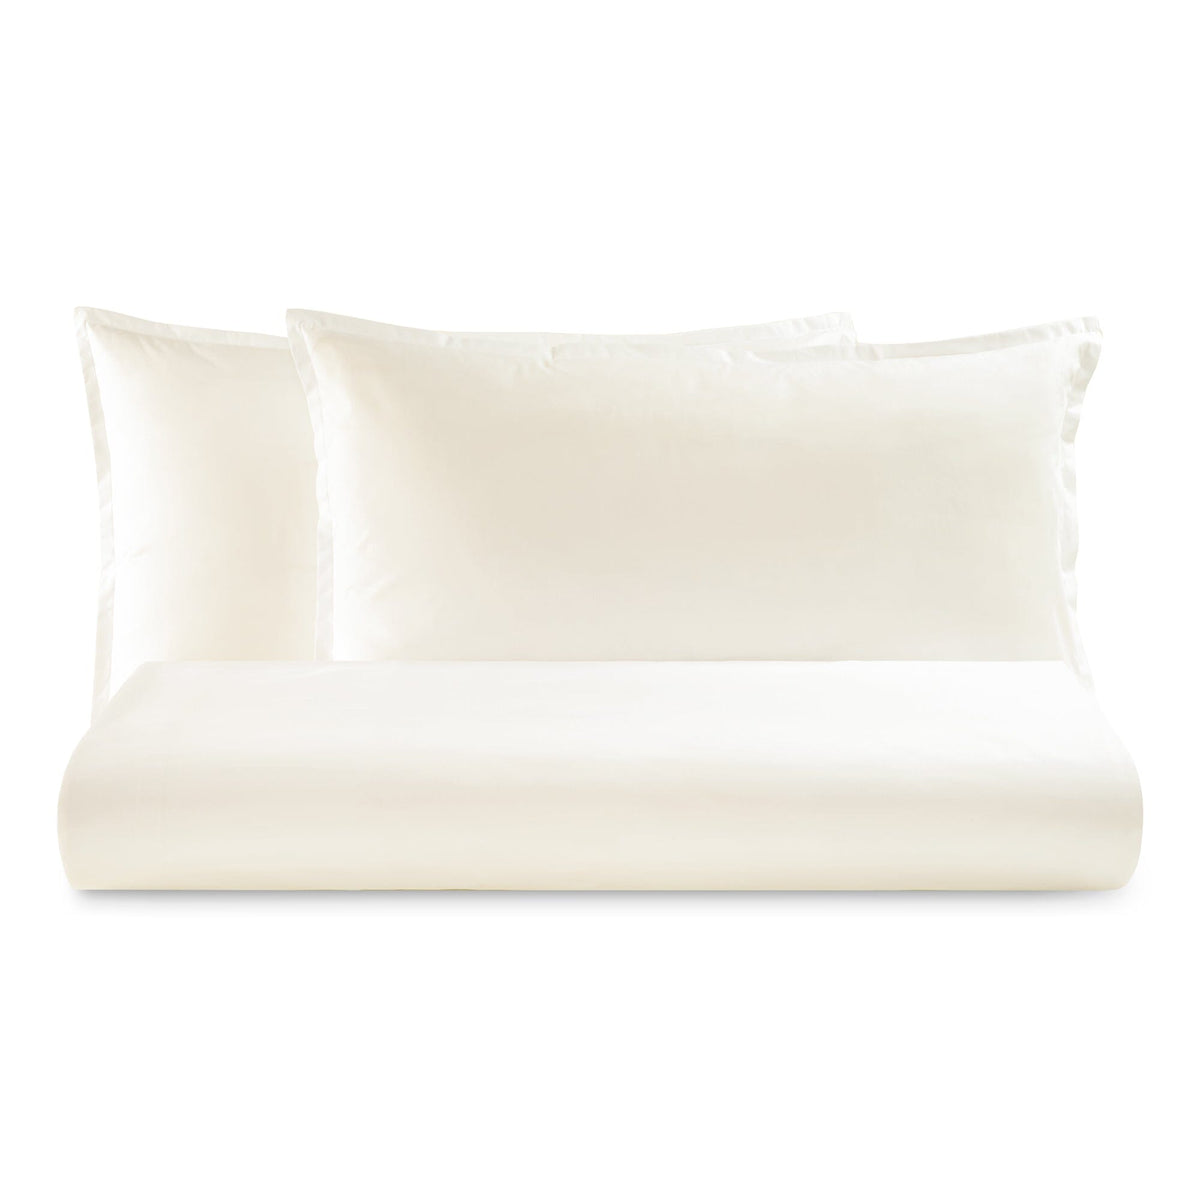 Sheet Set in 200TC Pure Cotton Percale Solid Color - Milano